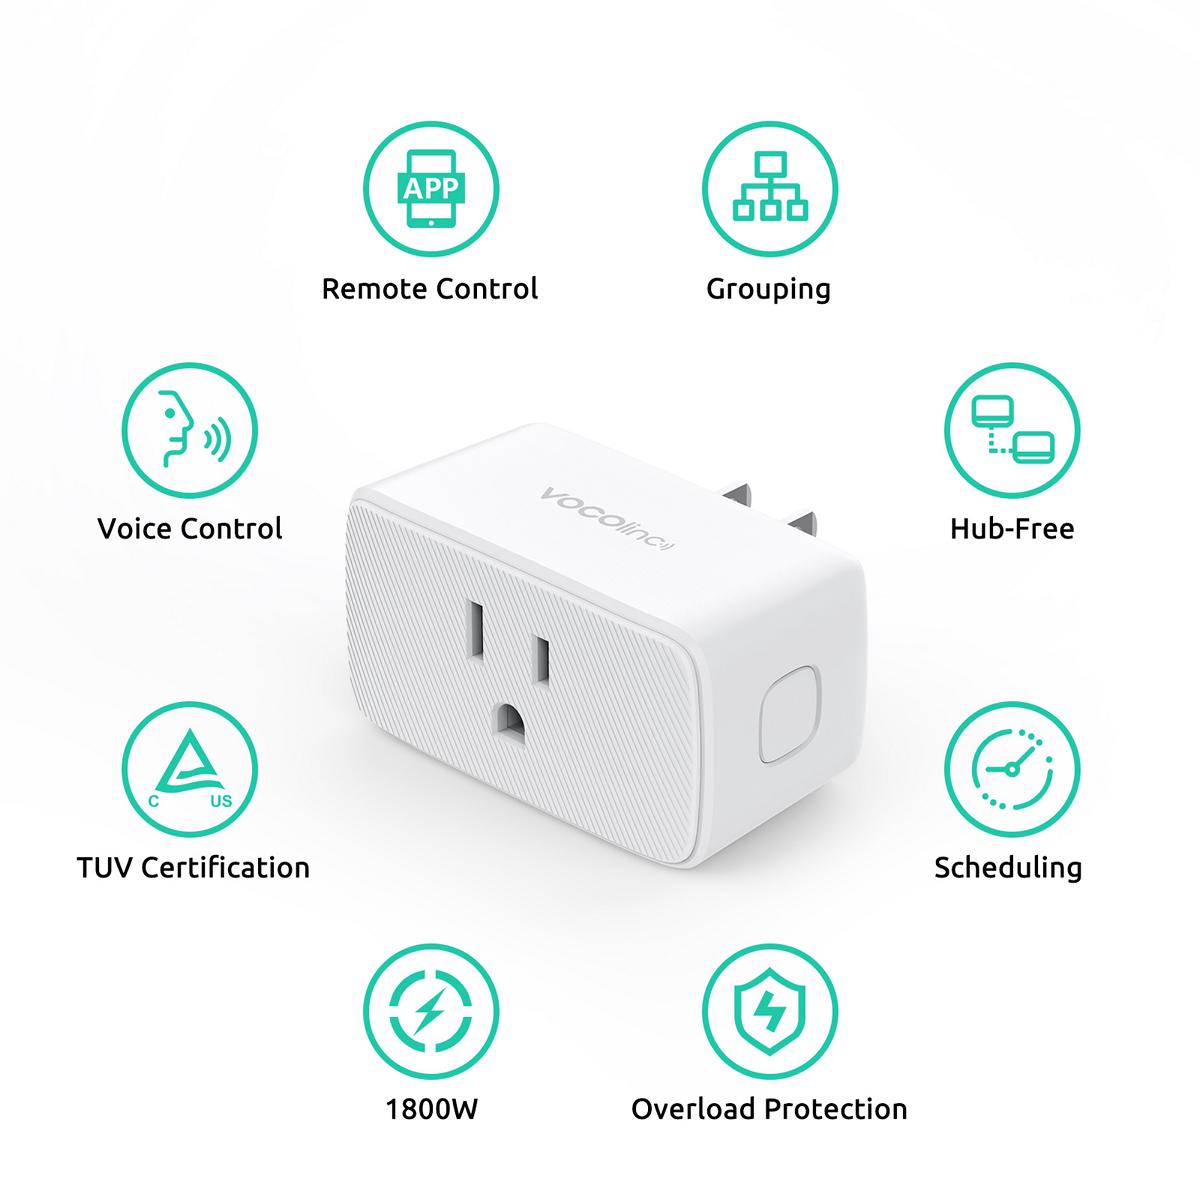 New One Outdoor Smart Plug, 2.4GHz Outdoor WiFi Outlet with 2 Independent  Outlets, Compatible with Alexa Google Home Smart Life,Wireless Voice Remote